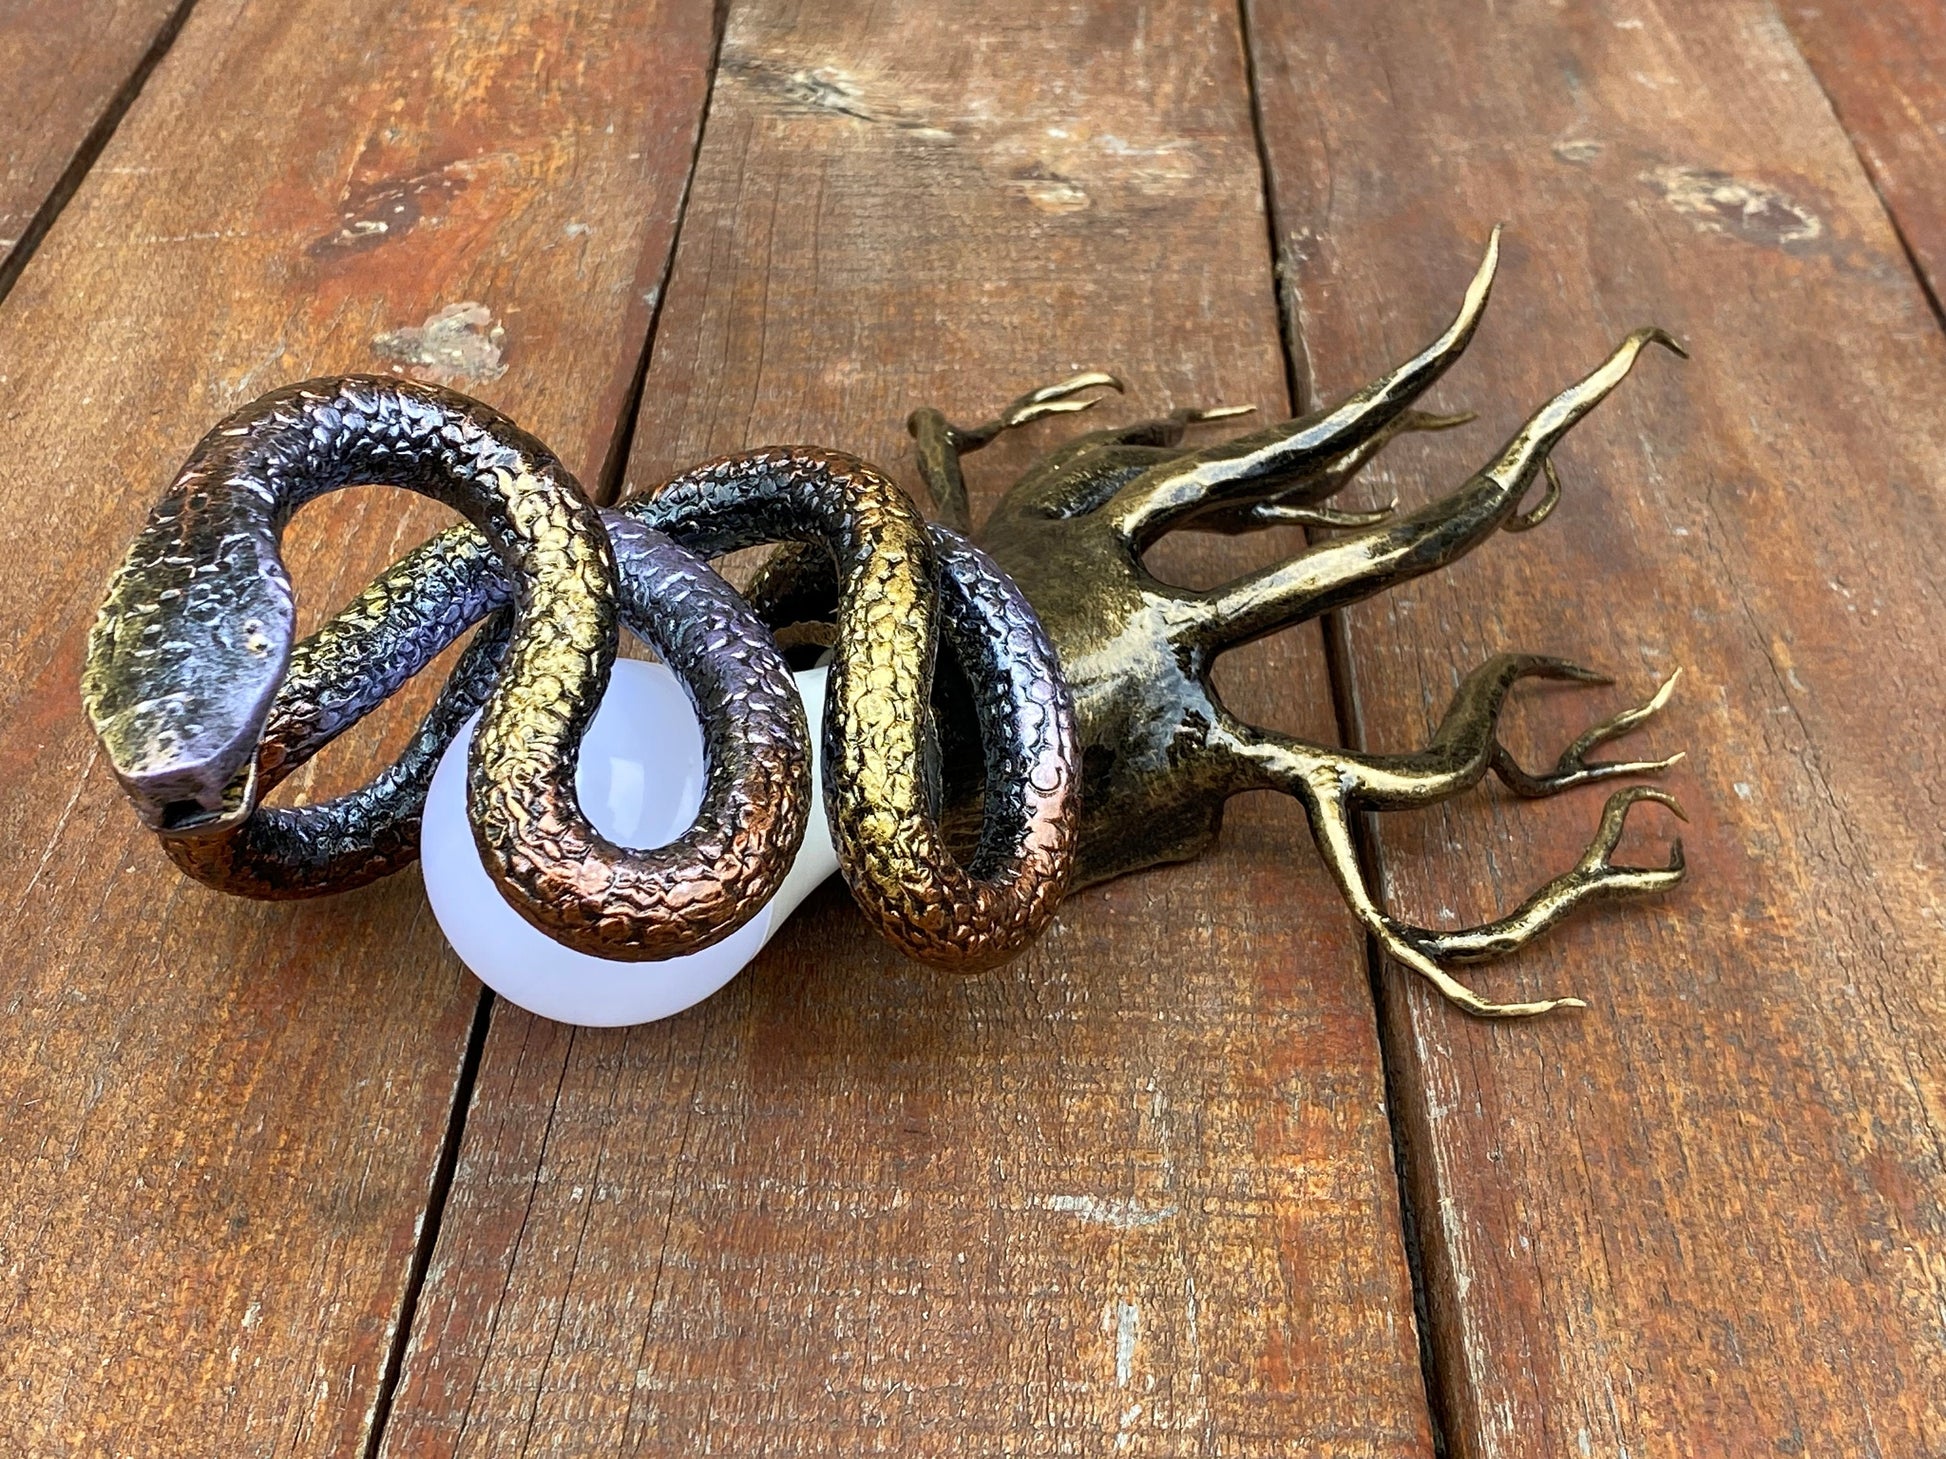 Wall sconce, medieval, snake, Christmas, anniversary, birthday, sconce, candle, viking, wedding, newlyweds, forest, fireplace, Christmas